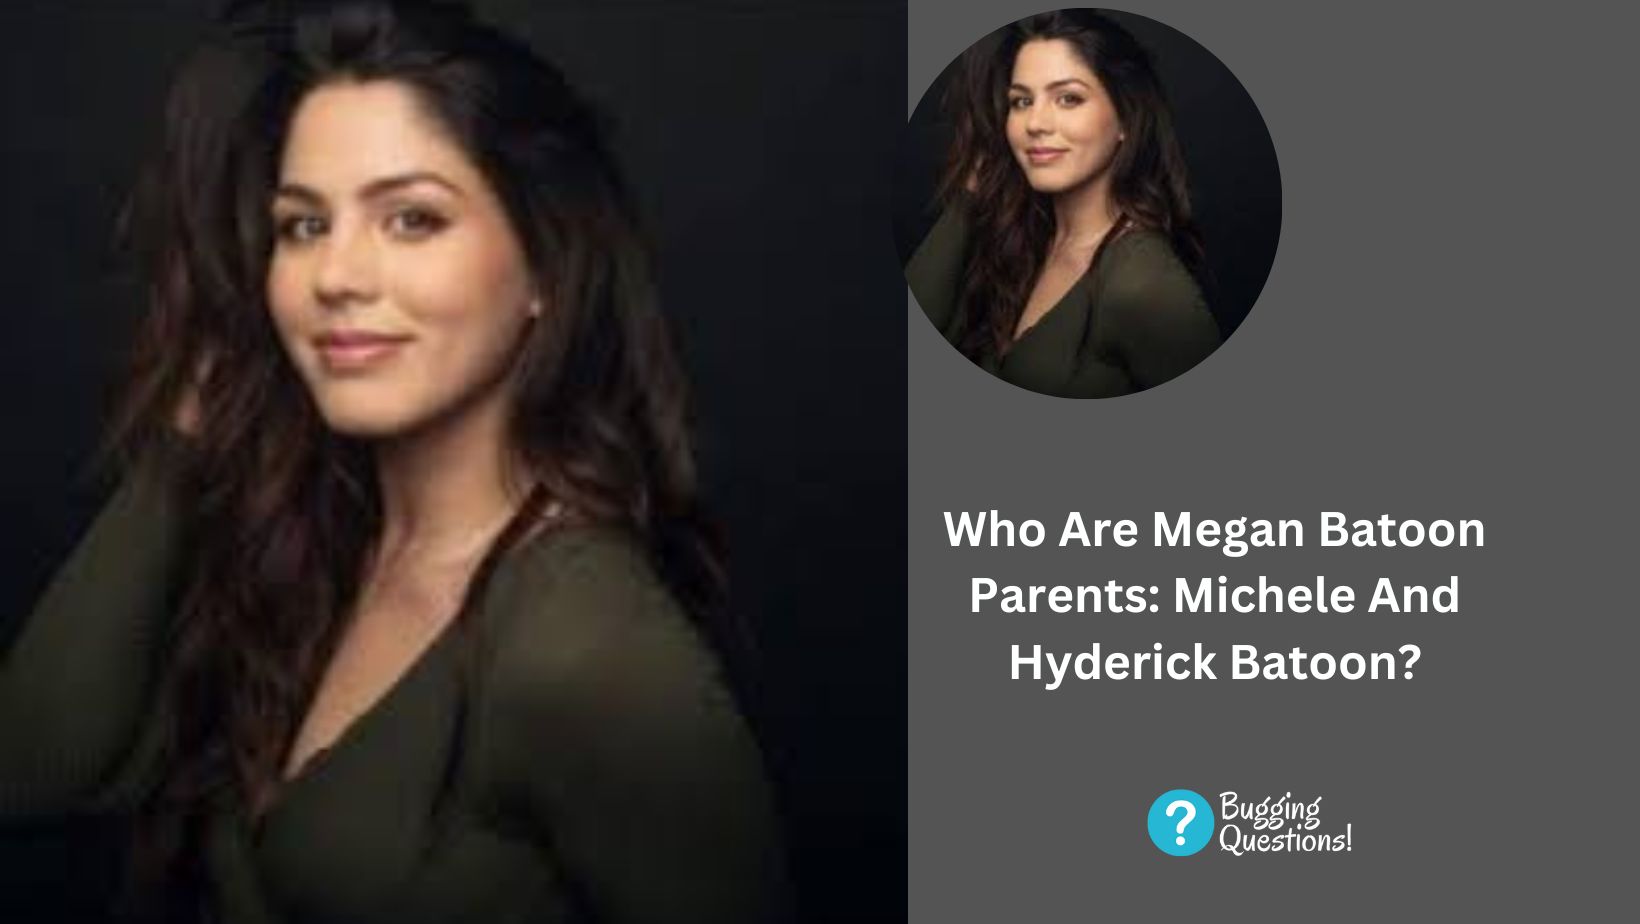 Who Are Megan Batoon Parents: Michele And Hyderick Batoon?